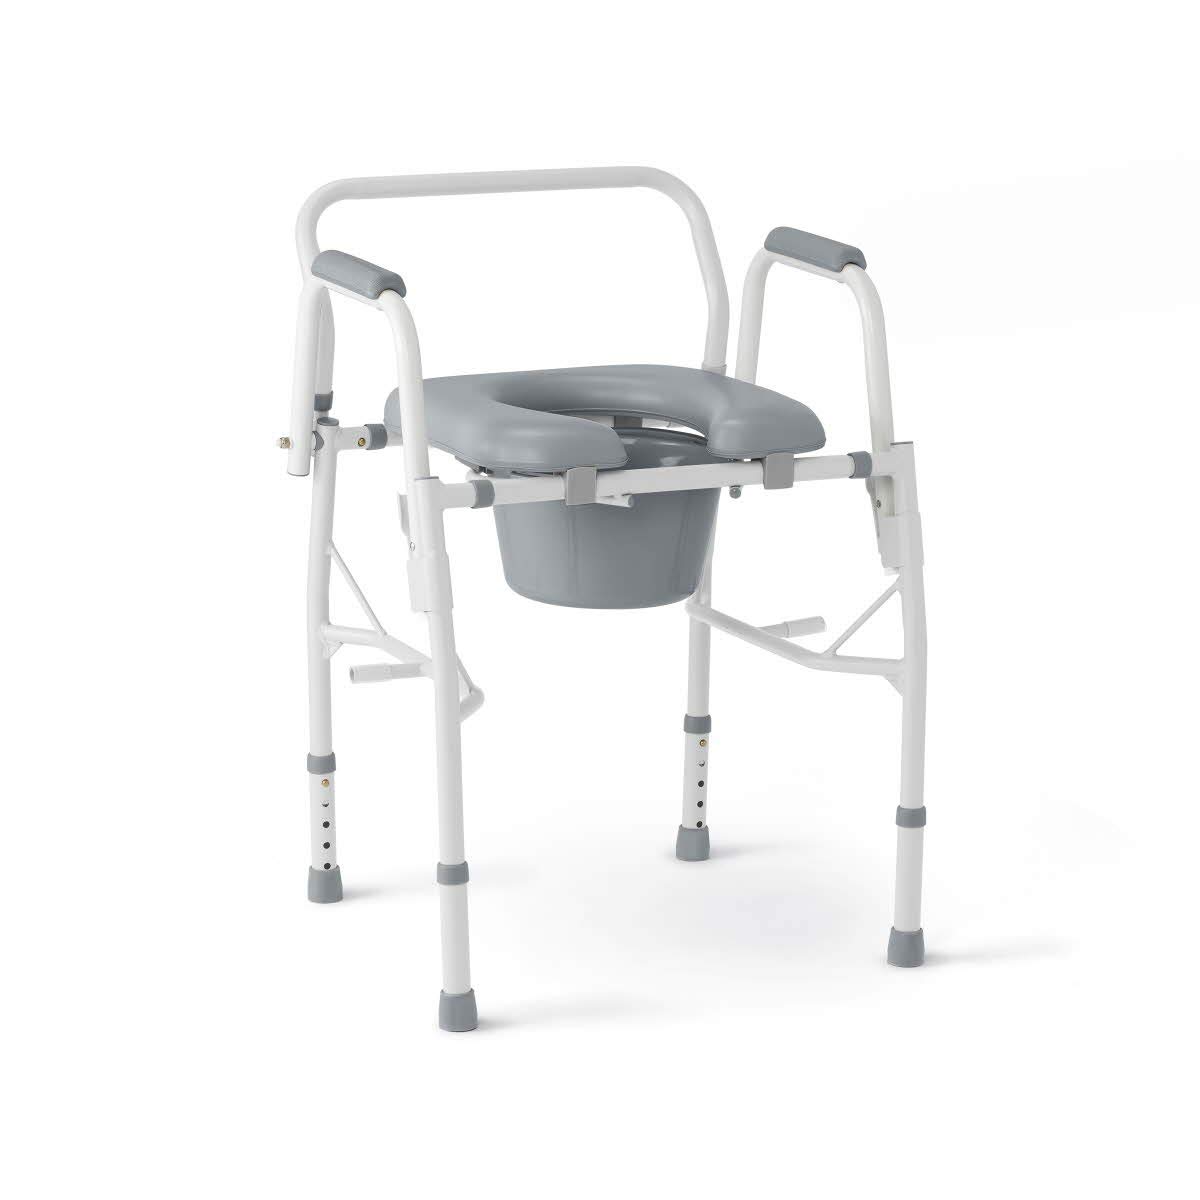 Medline Drop Arm Commode, Swing Arm Rest for Easy Transfer, Padded Seat, Contains Chair, Pail, Lid, and Splash Guard, 350lb. Weight Capacity